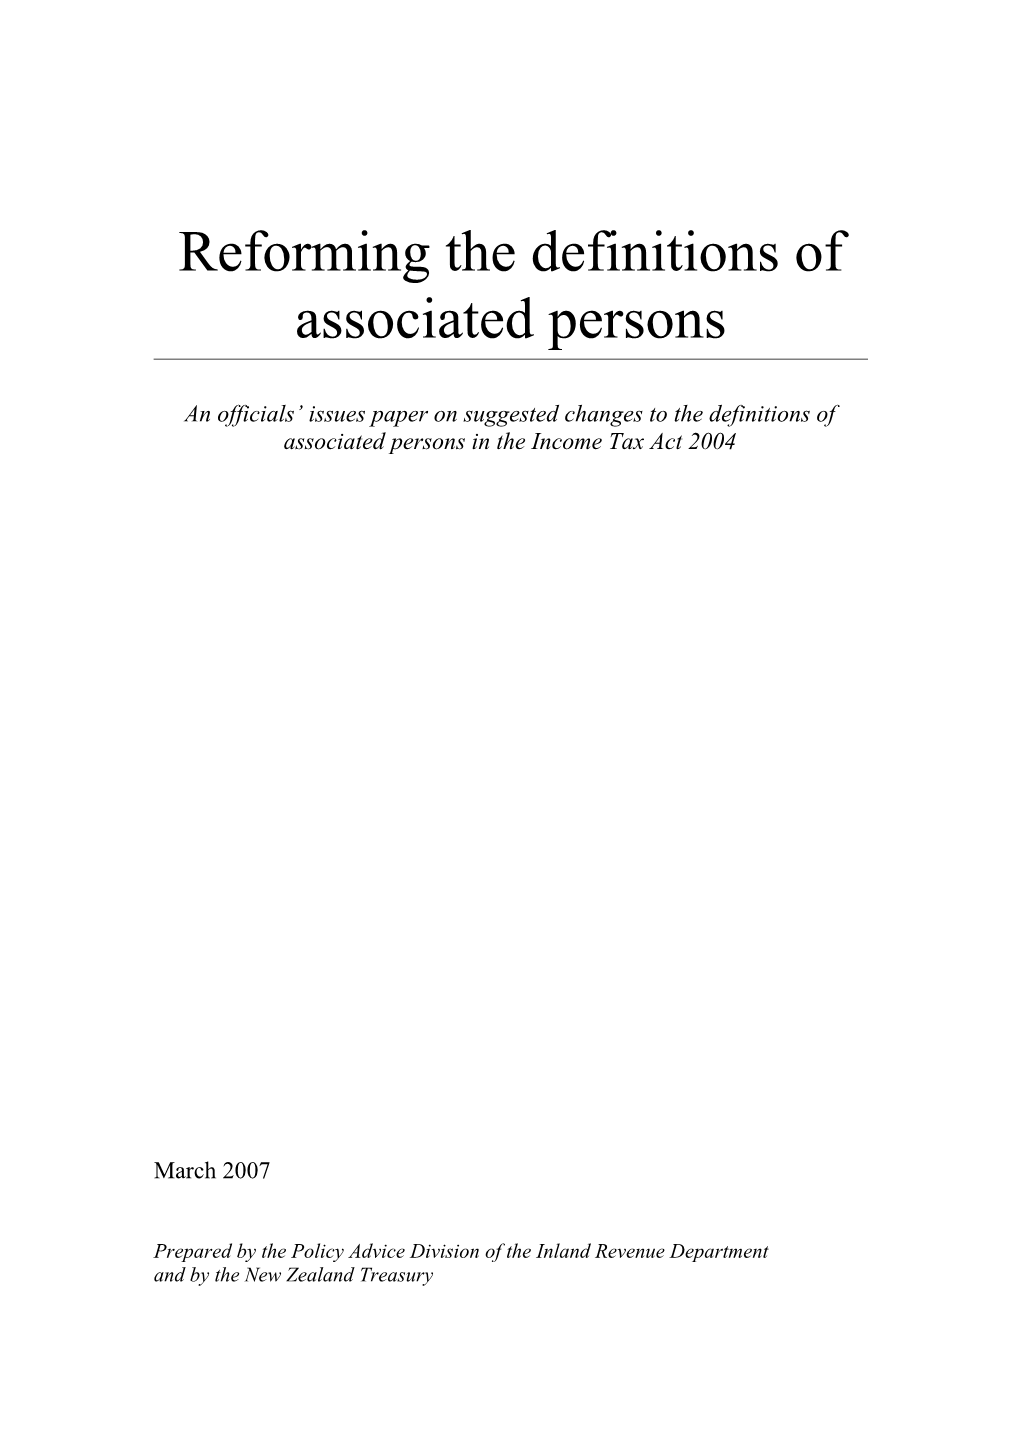 Reforming the Definitions of Associated Persons